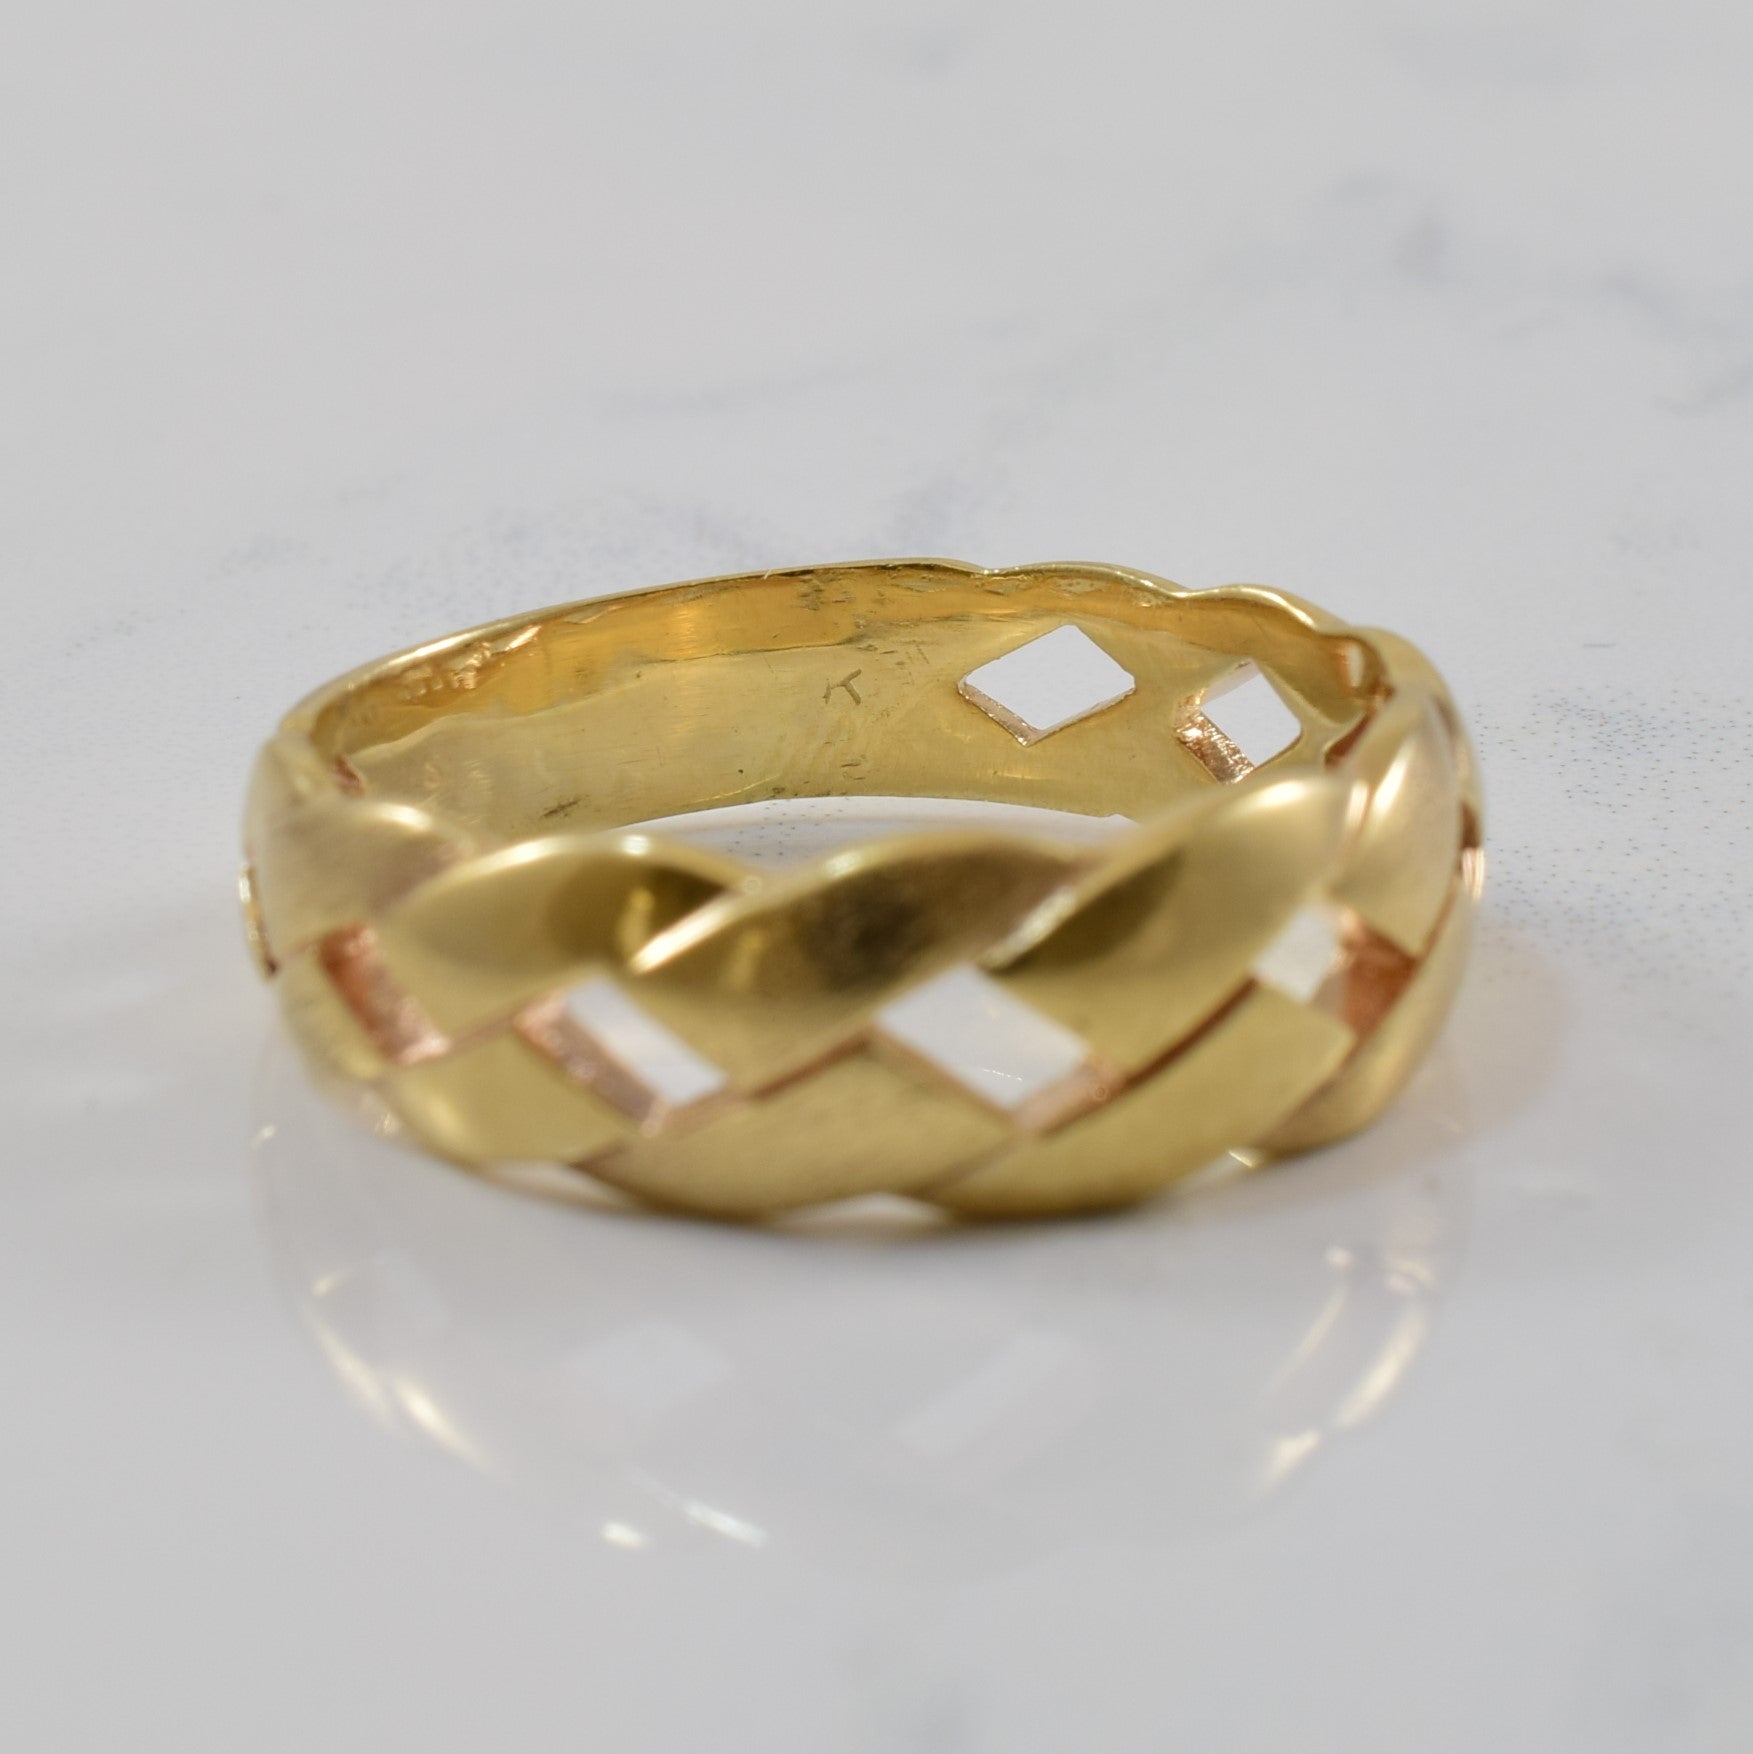 Woven Gold Band | SZ 11 |